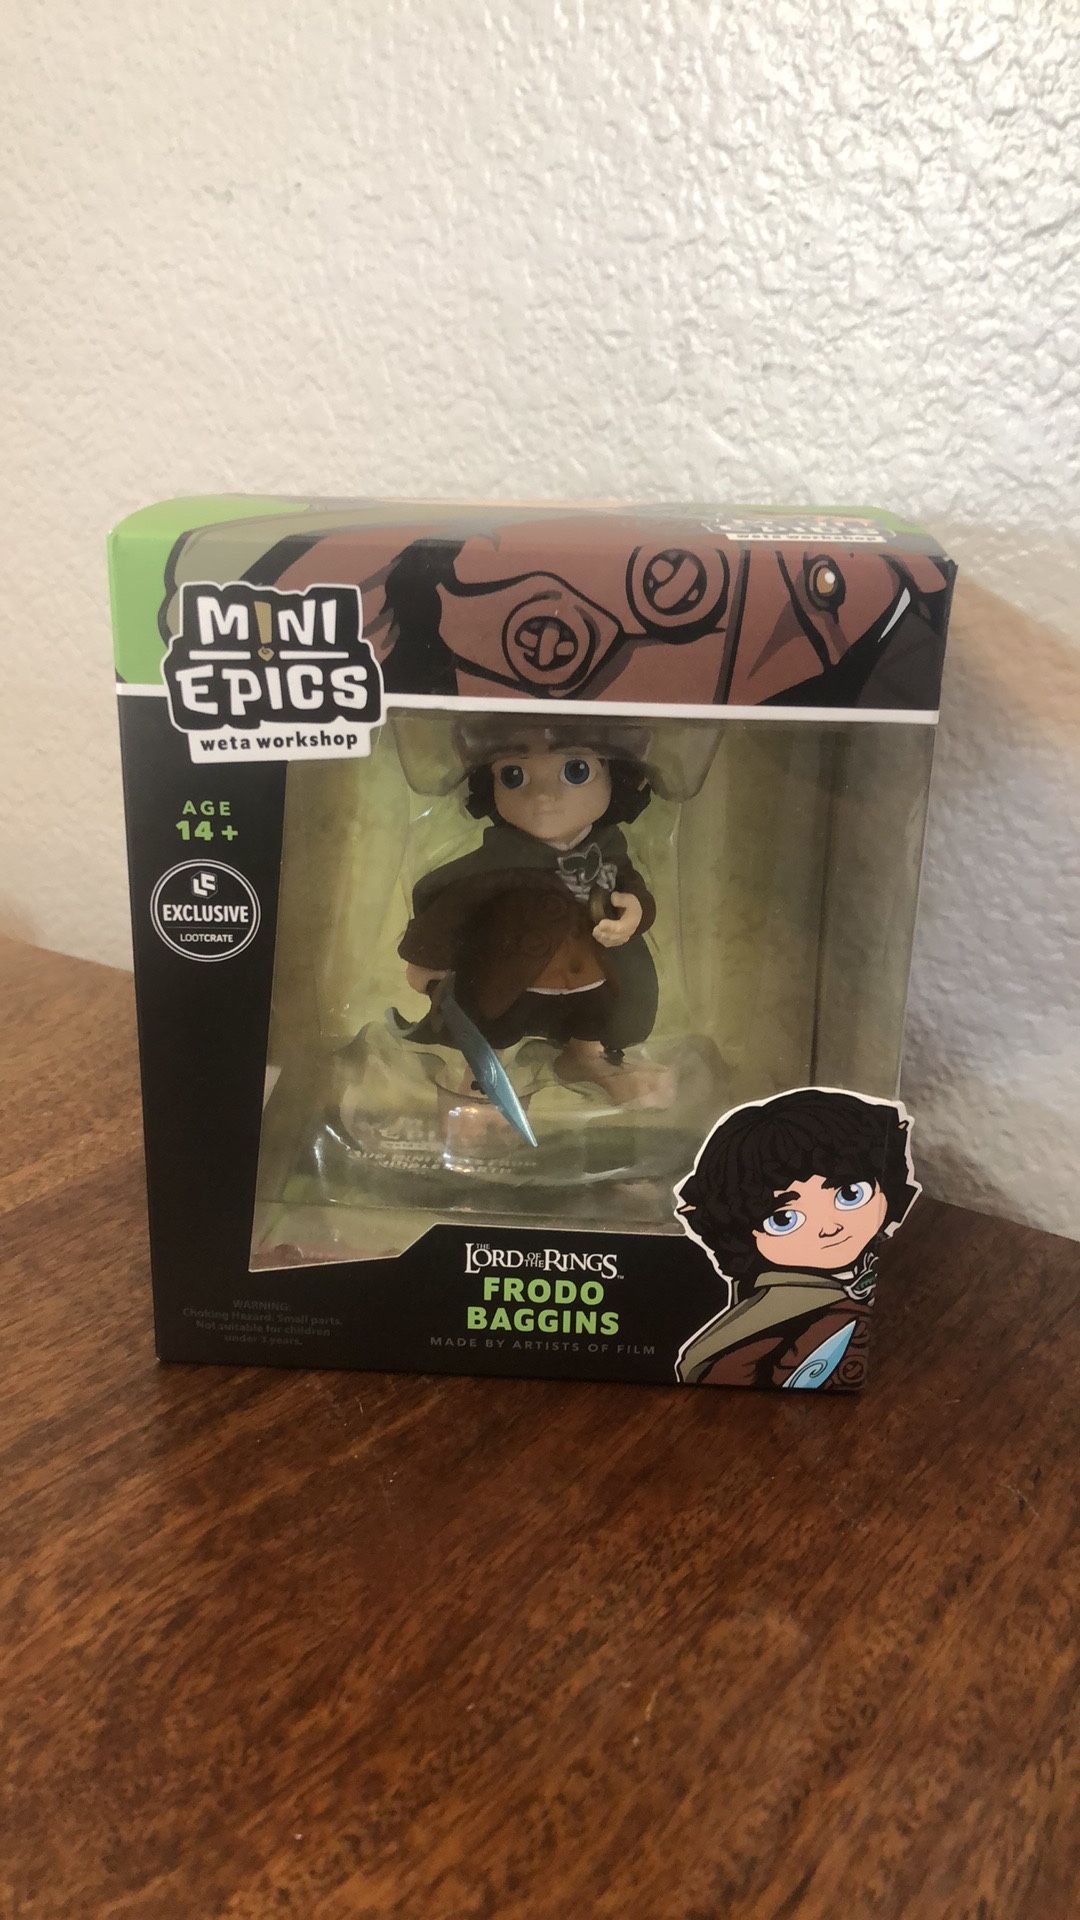 NEW Lord Of The Rings - Frodo - Exclusive Figure - Mini Epics 4” Toy